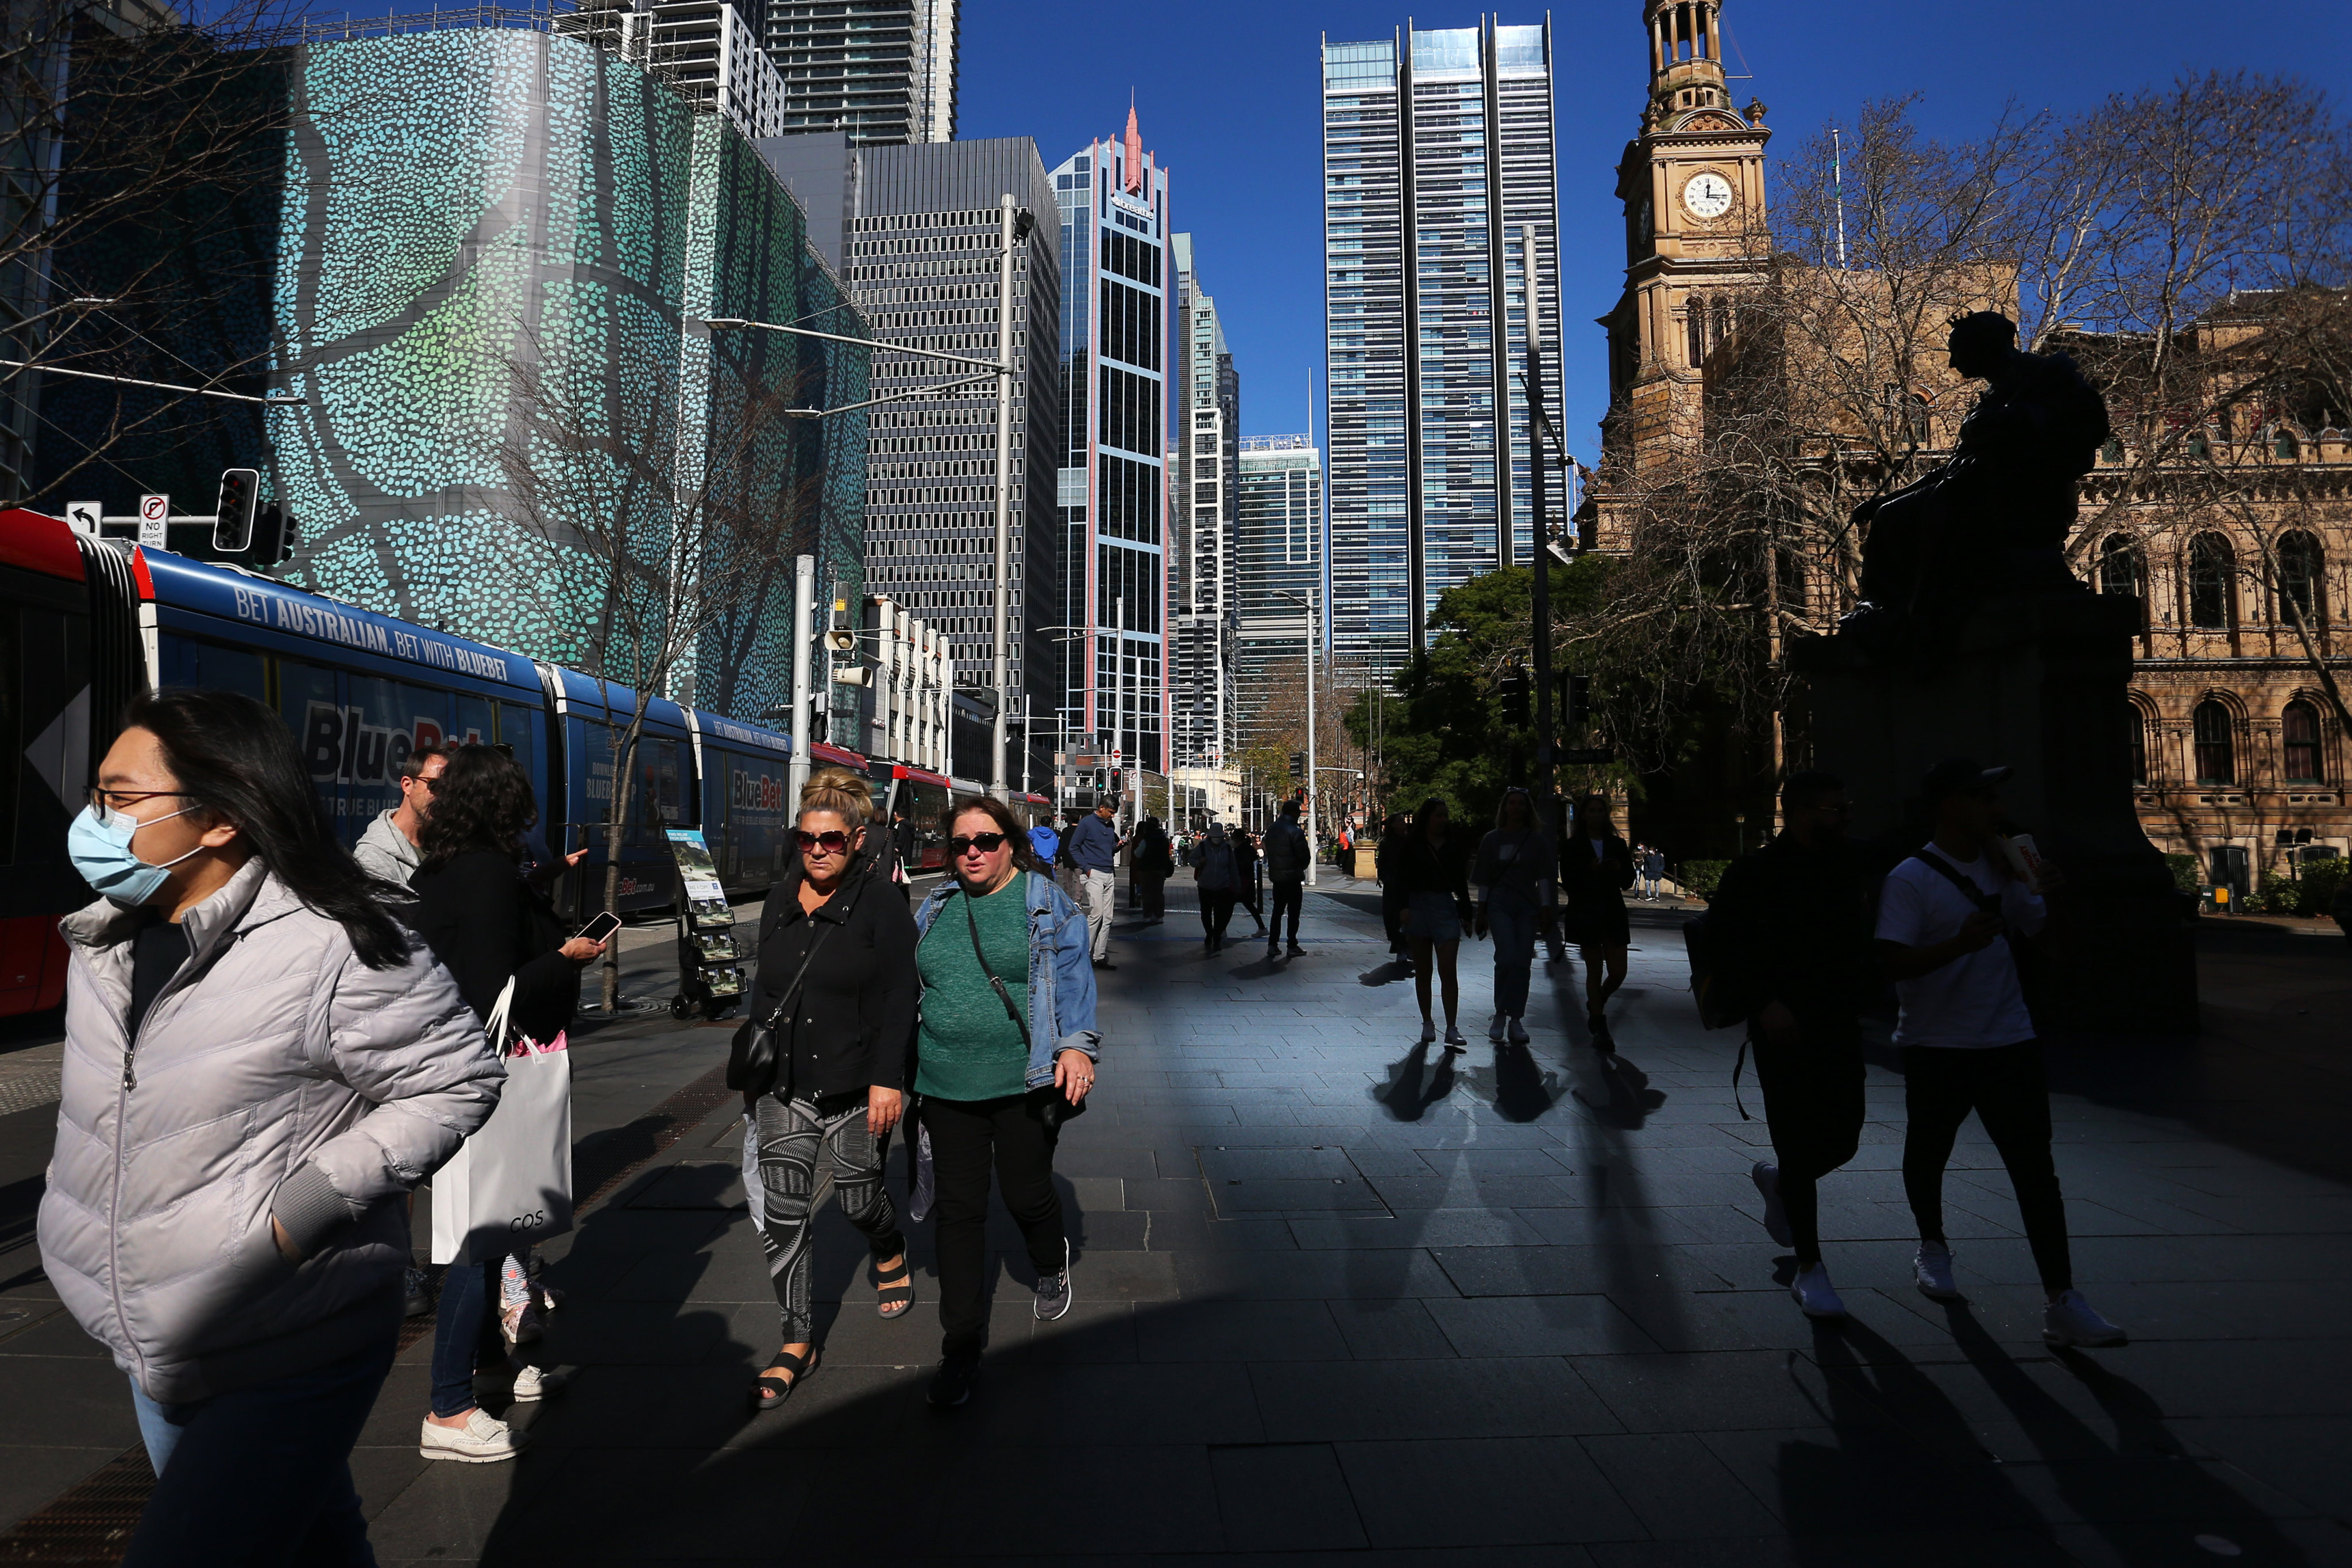 Pedestrians and shoppers make their way through the central business district of Sydney last summer. Photo: Getty Images